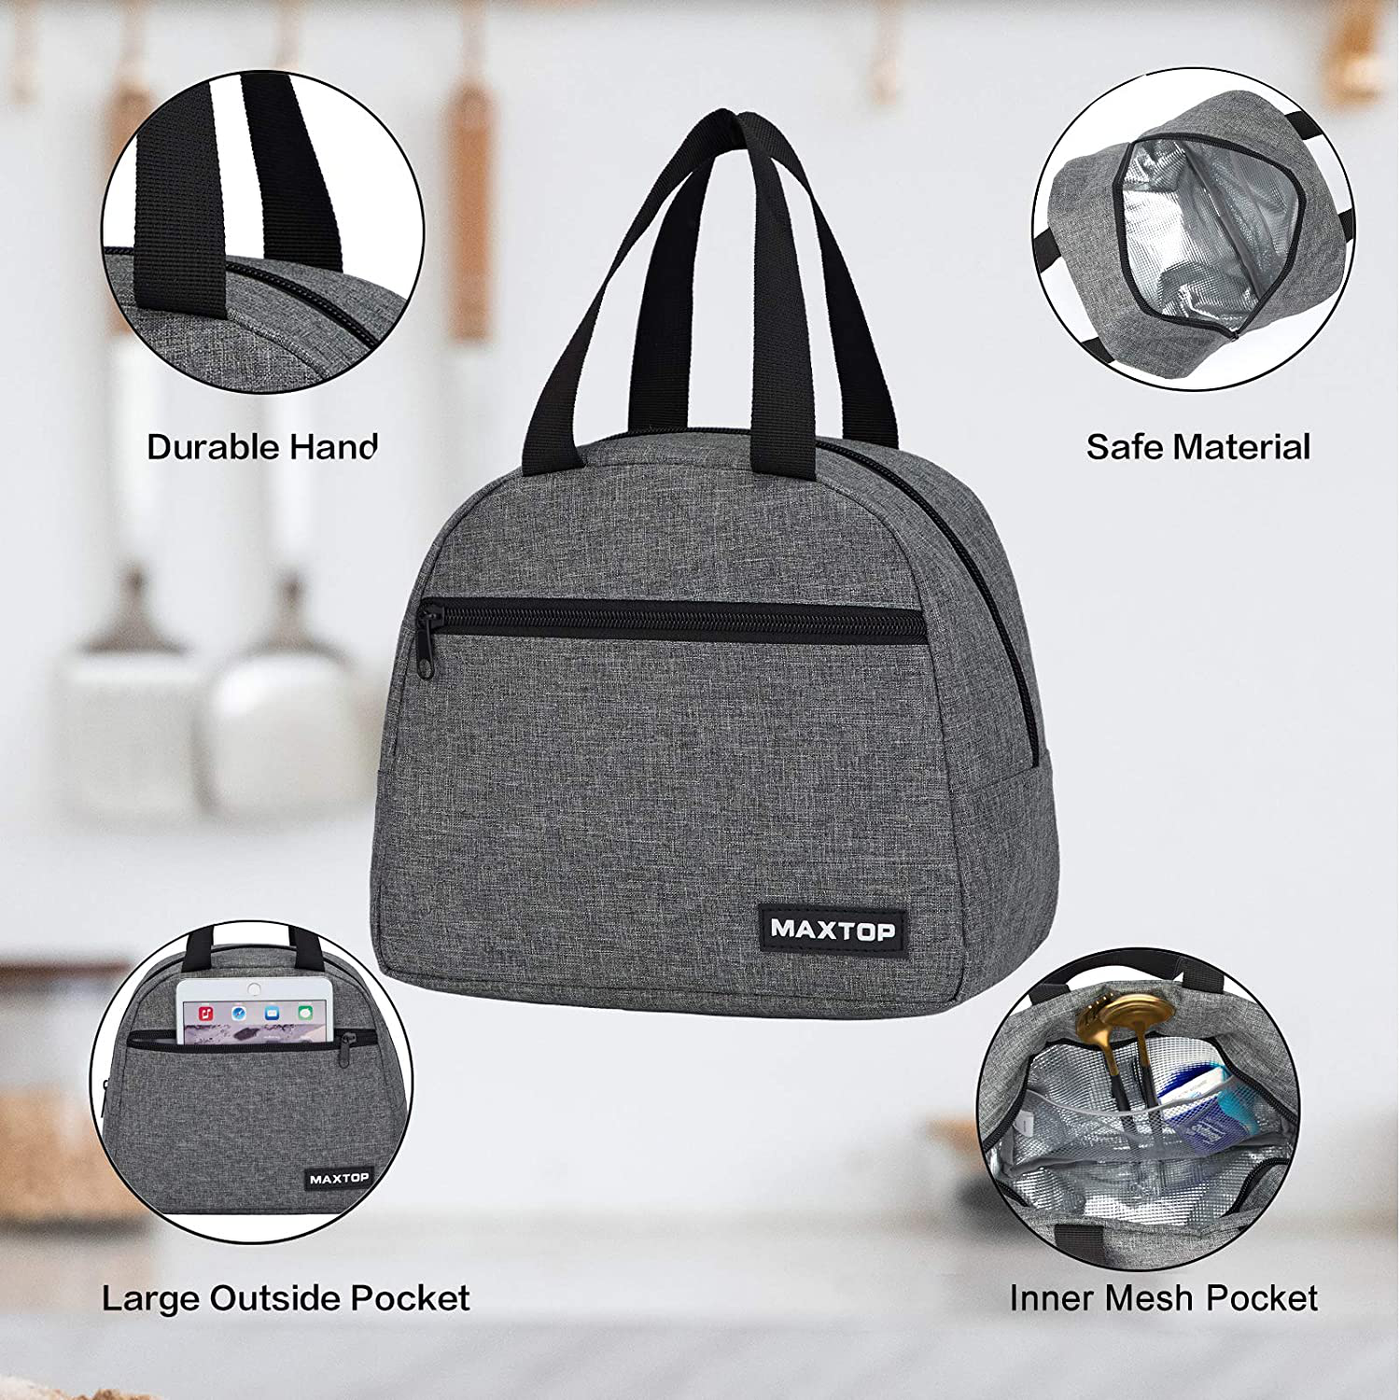 Lunch Bags for Women,Insulated Thermal Lunch Box Bag for Women With Front Pocket and Inner Mesh pocket, Cooler Bag Gifts for Adults Women Men Work College Picnic Beach Park School